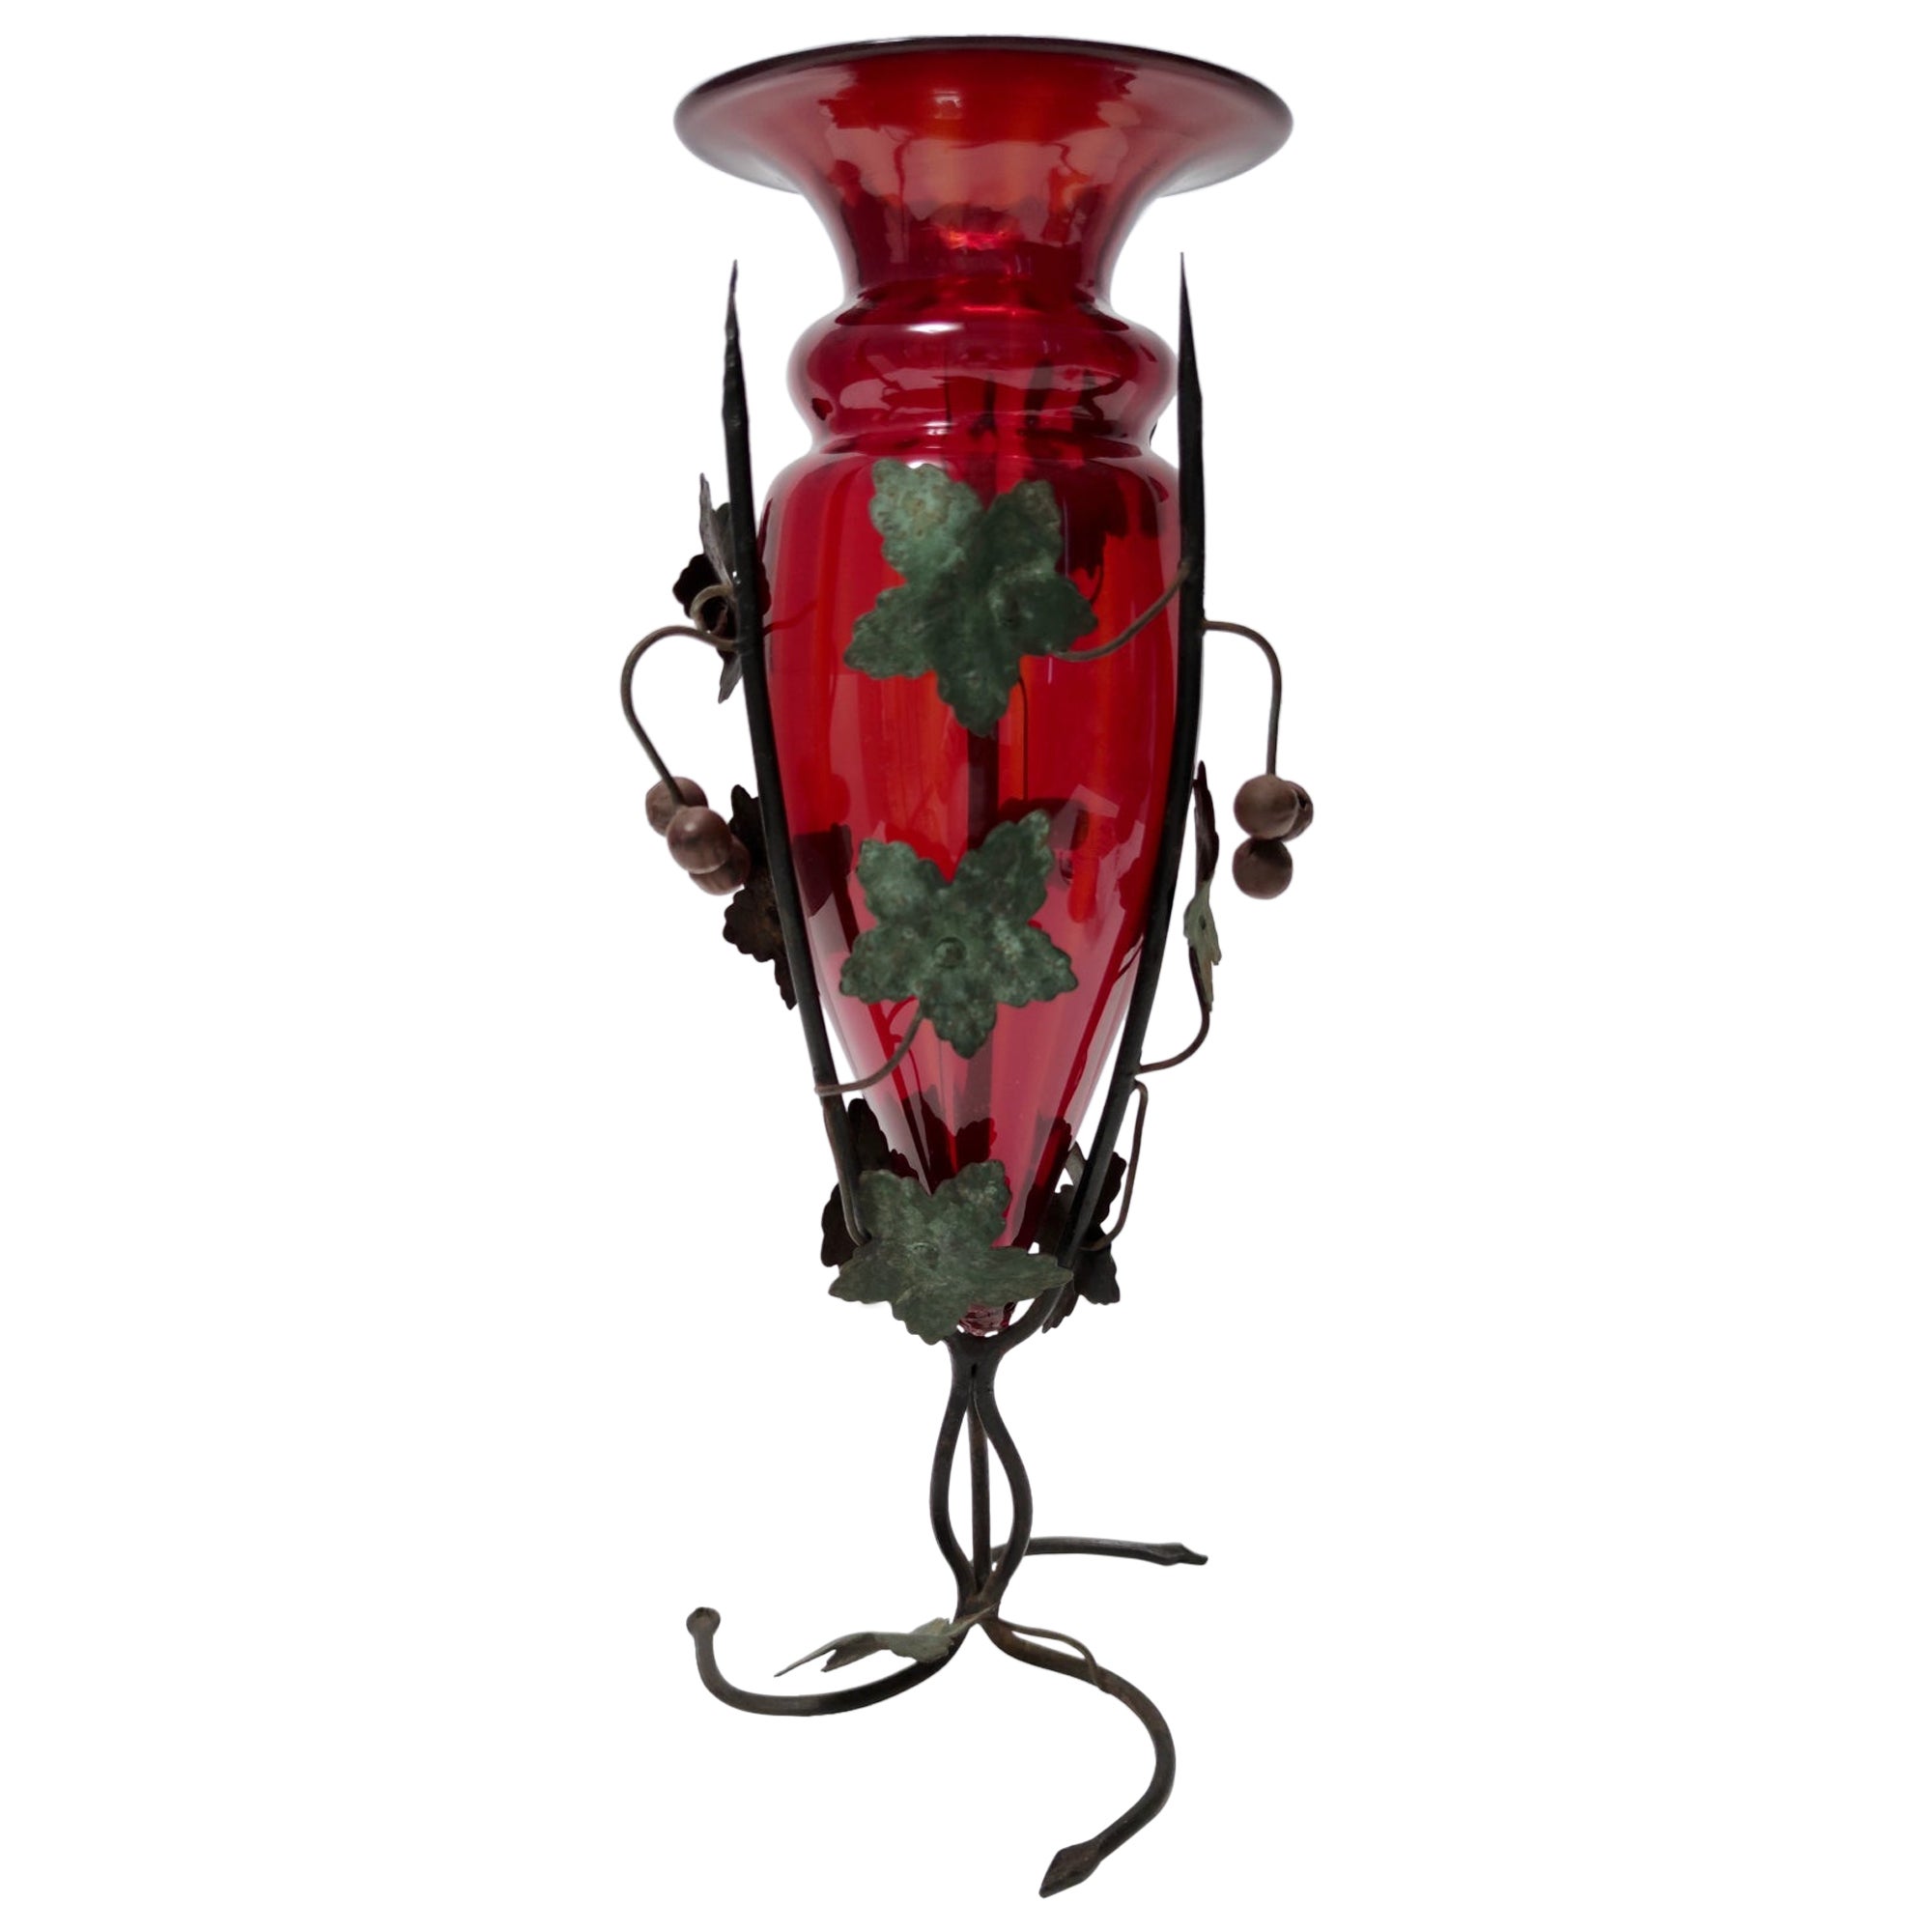 Ruby Red Murano Glass Vase with Iron Grape Vines Ascribable to Umberto Bellotto